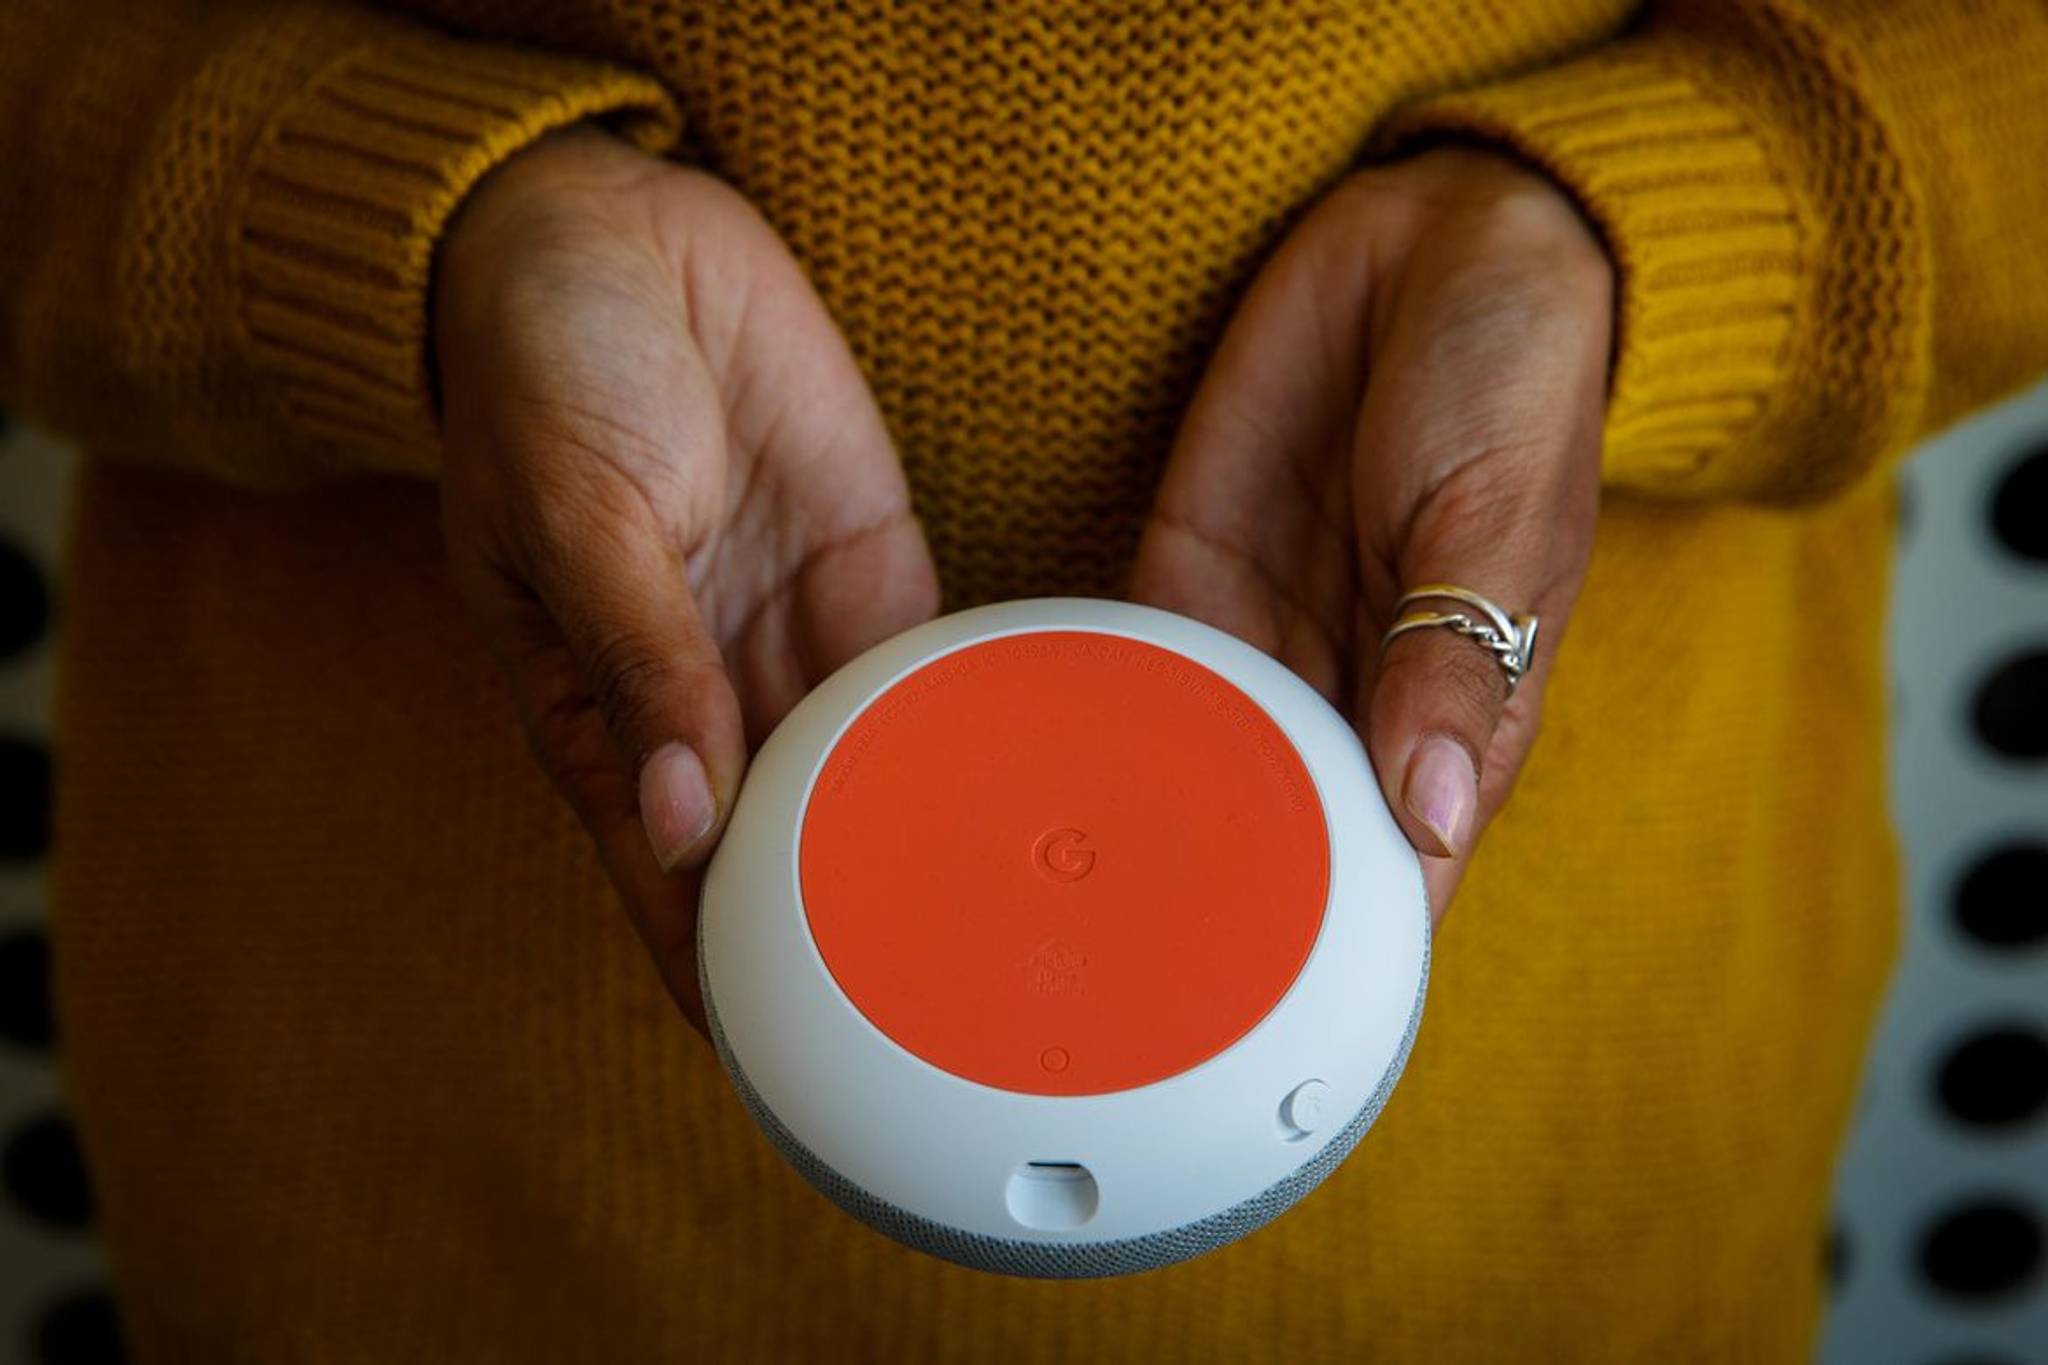 Google Mini is designed to blend into the home